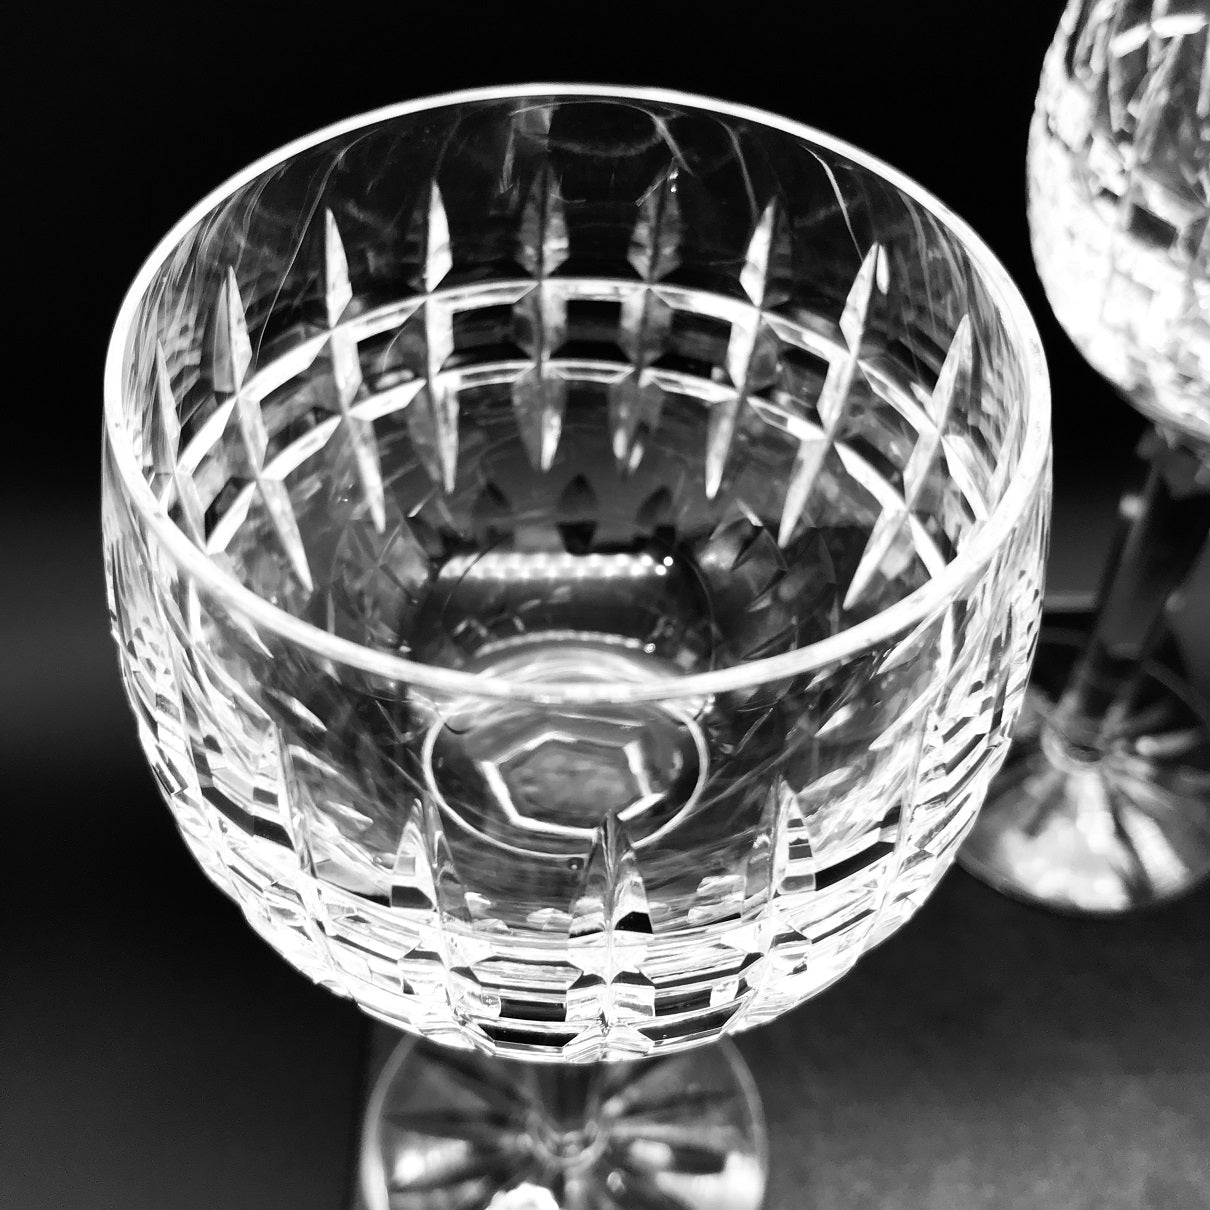 Waterford Crystal Glenmore Hock Pair  The Waterford Glenmore pattern is a stunning combination of brilliance and clarity.